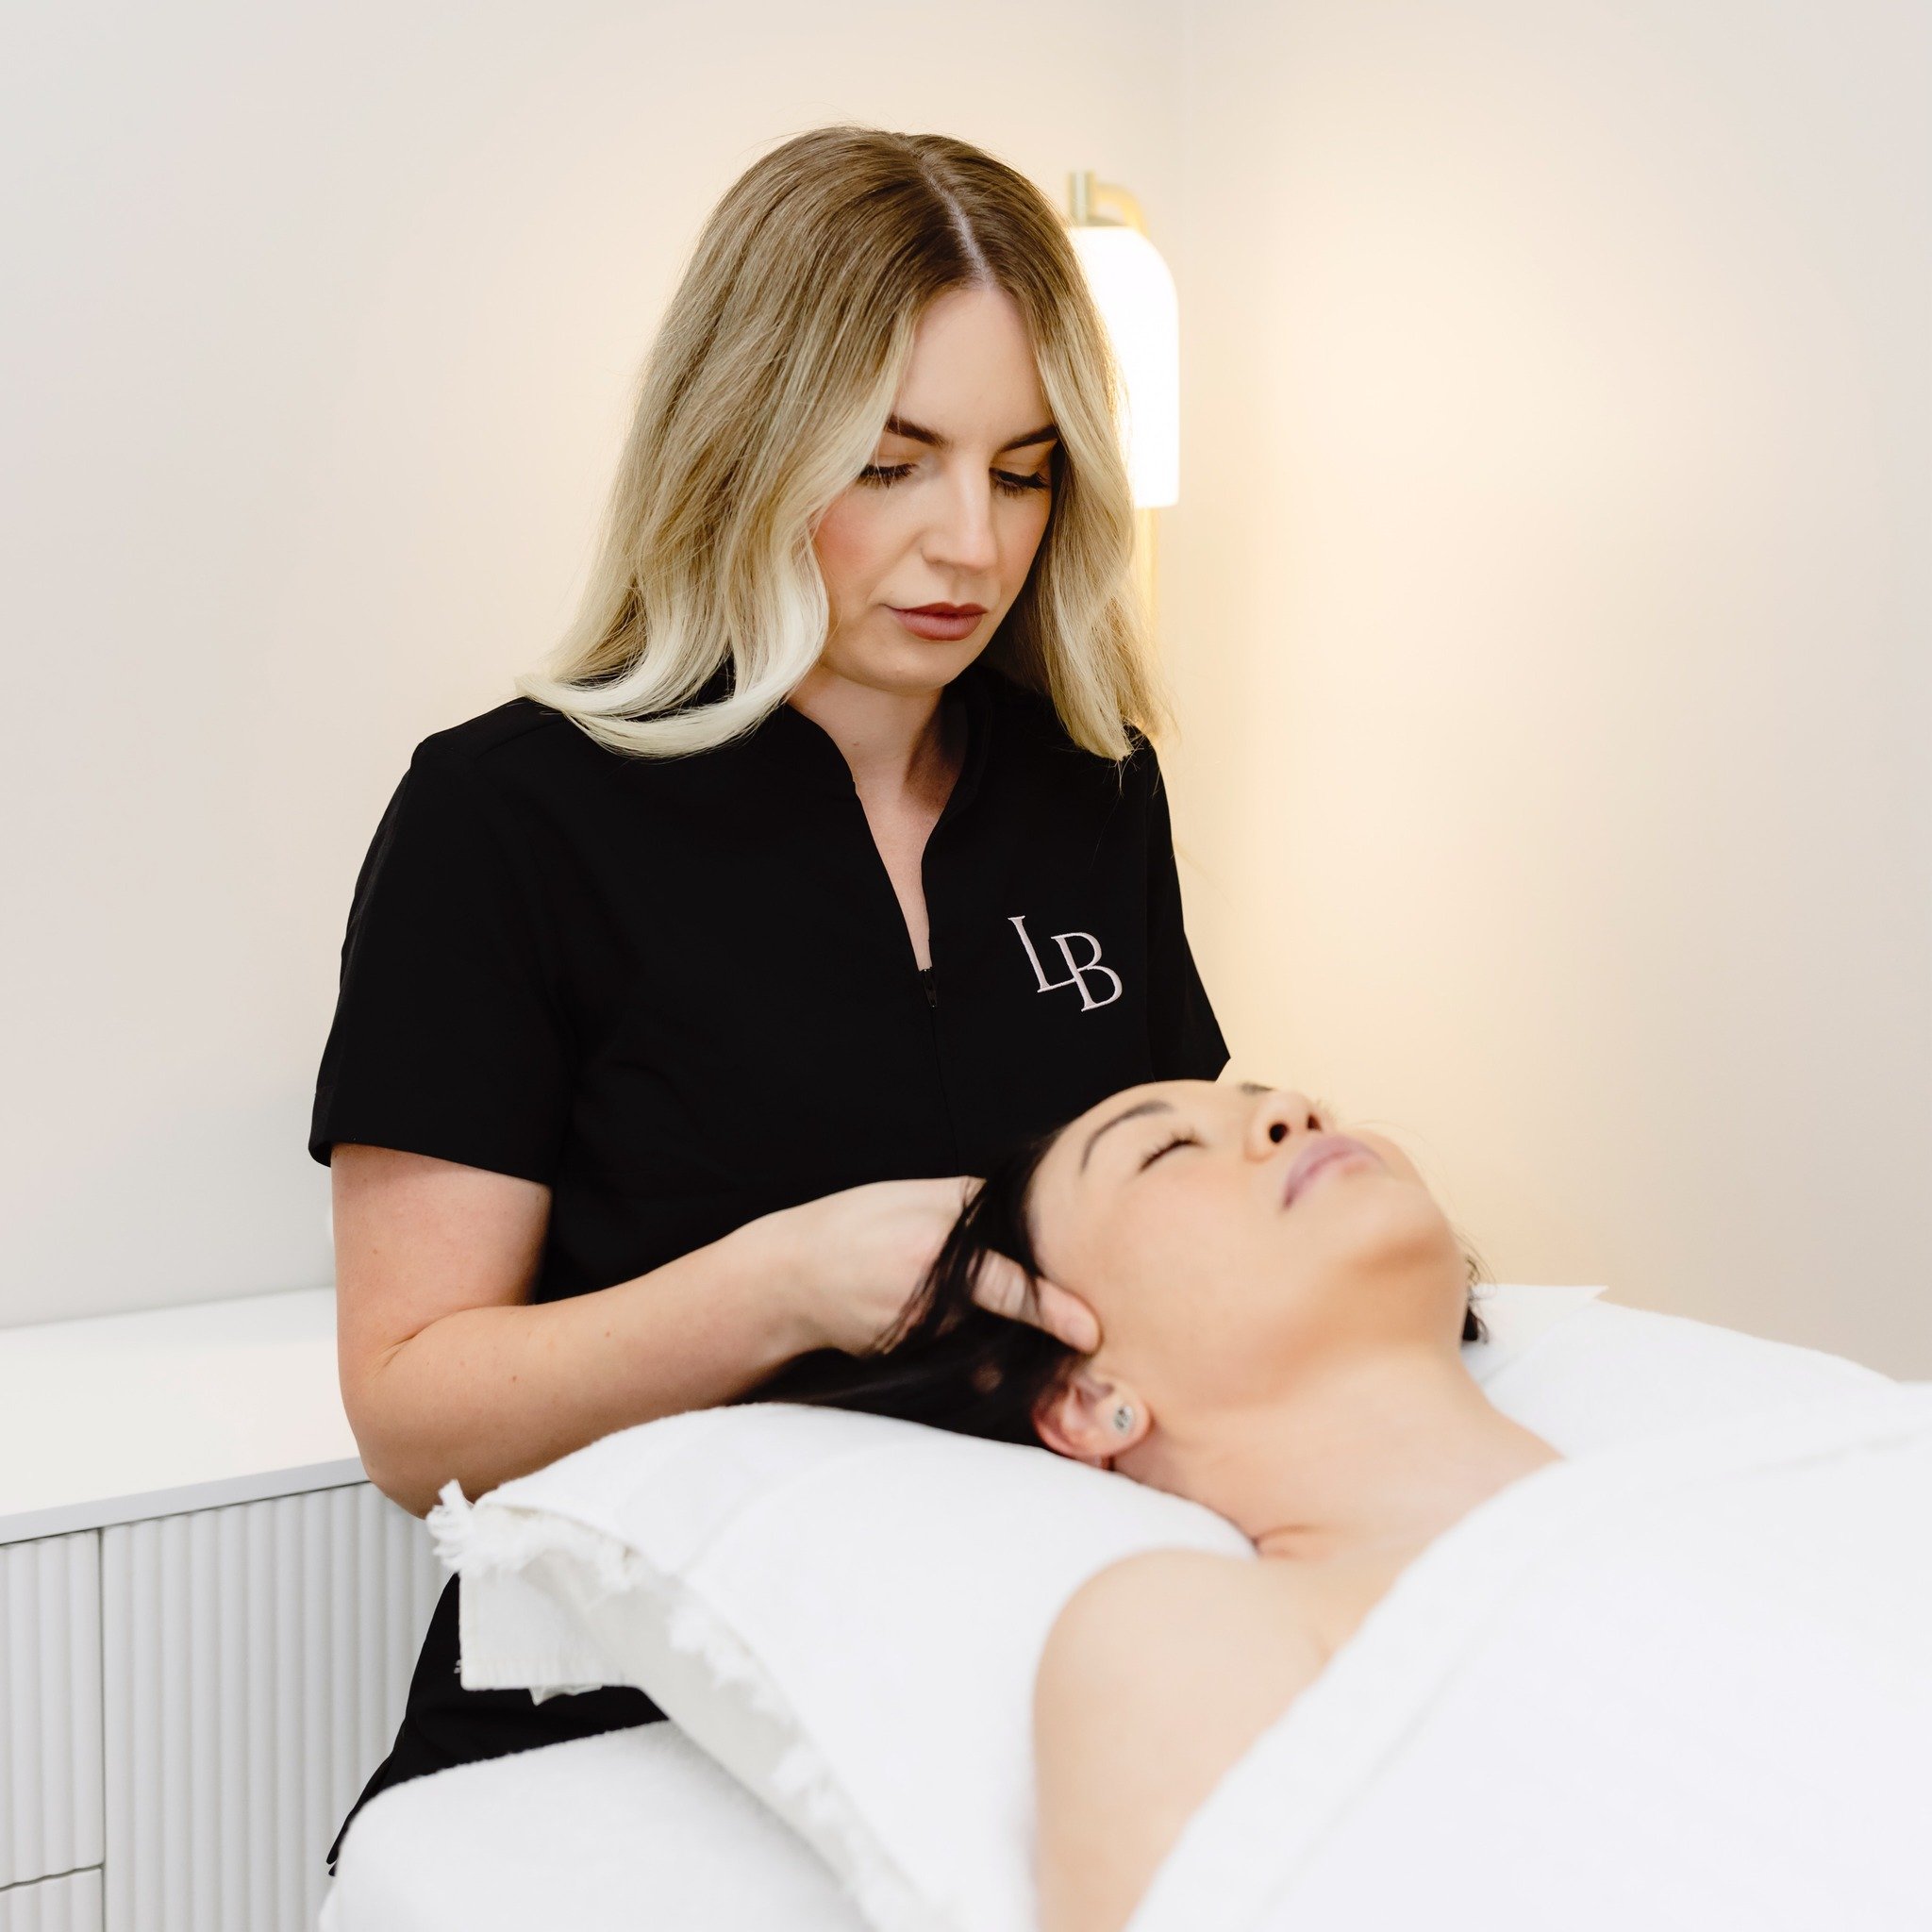 ✨We can not wait to pamper you ✨
Step into pure bliss and serenity at La beaute! 
Wind down after your big day or week? Treat yourself for Mother&rsquo;s Day? 

Now is your chances, appointments available this week ❤️